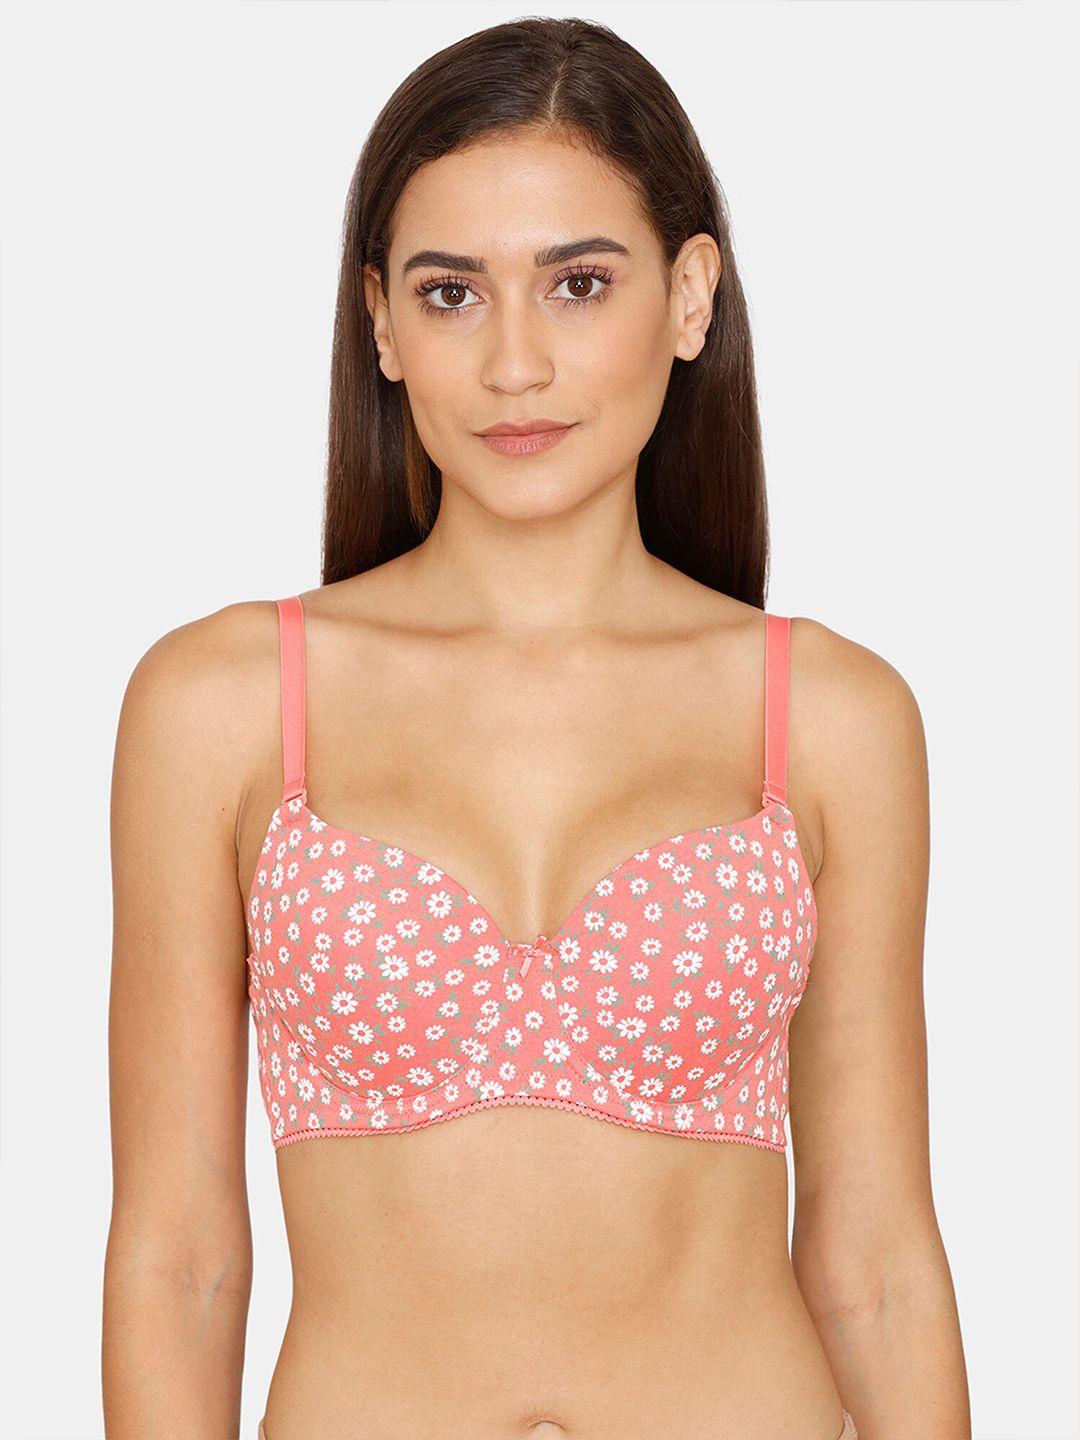 rosaline by zivame pink & white underwired lightly padded floral bra ro1164fashornge